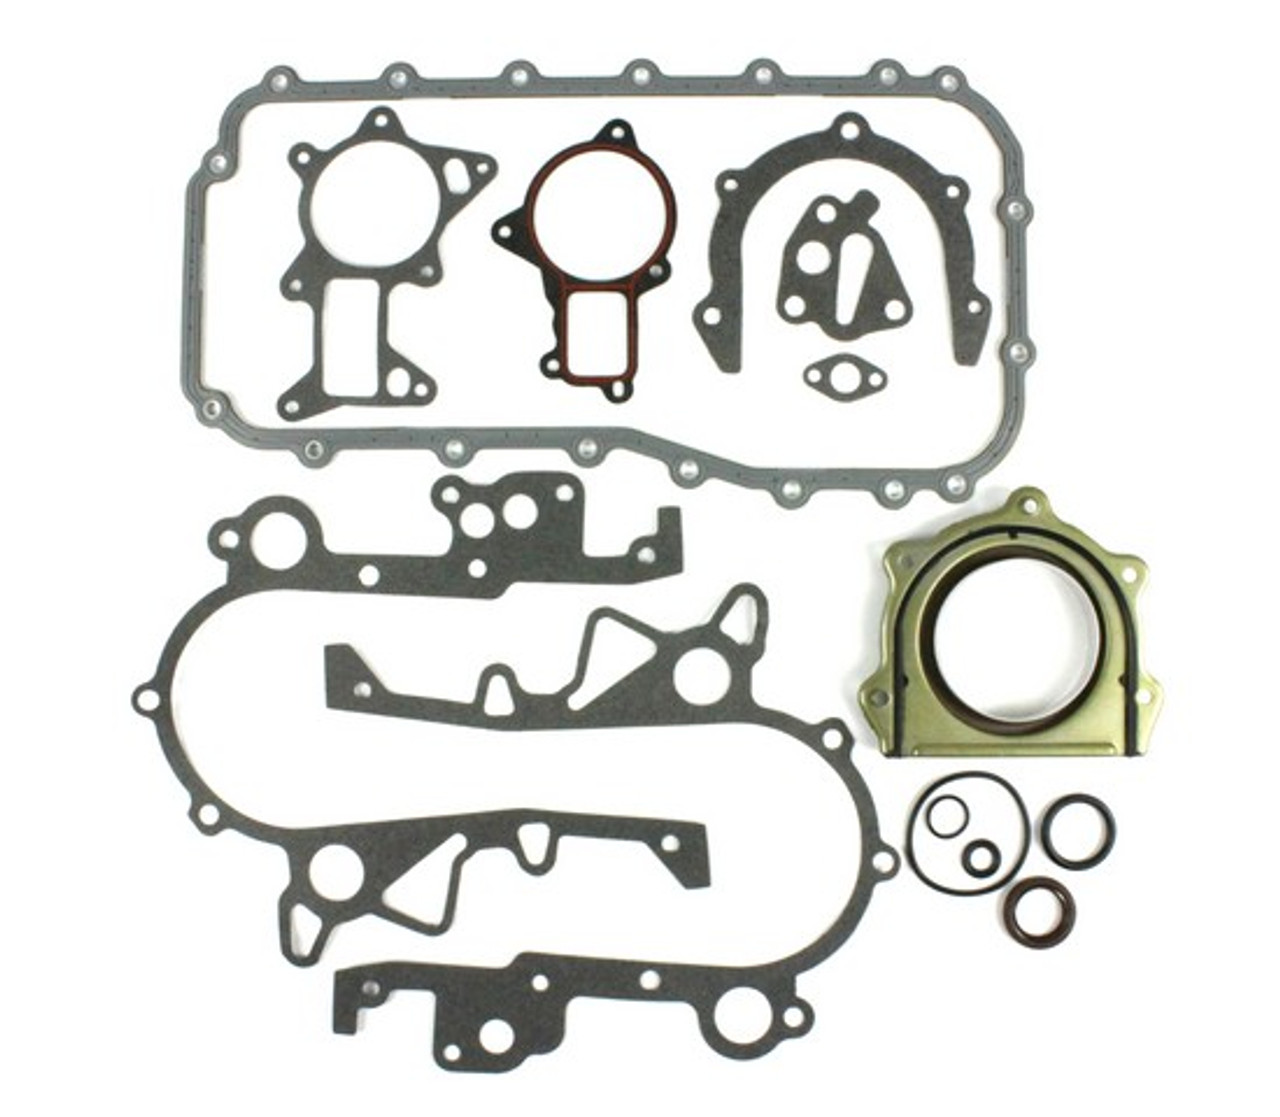 Lower Gasket Set 3.3L 2009 Chrysler Town & Country - LGS1135A.1